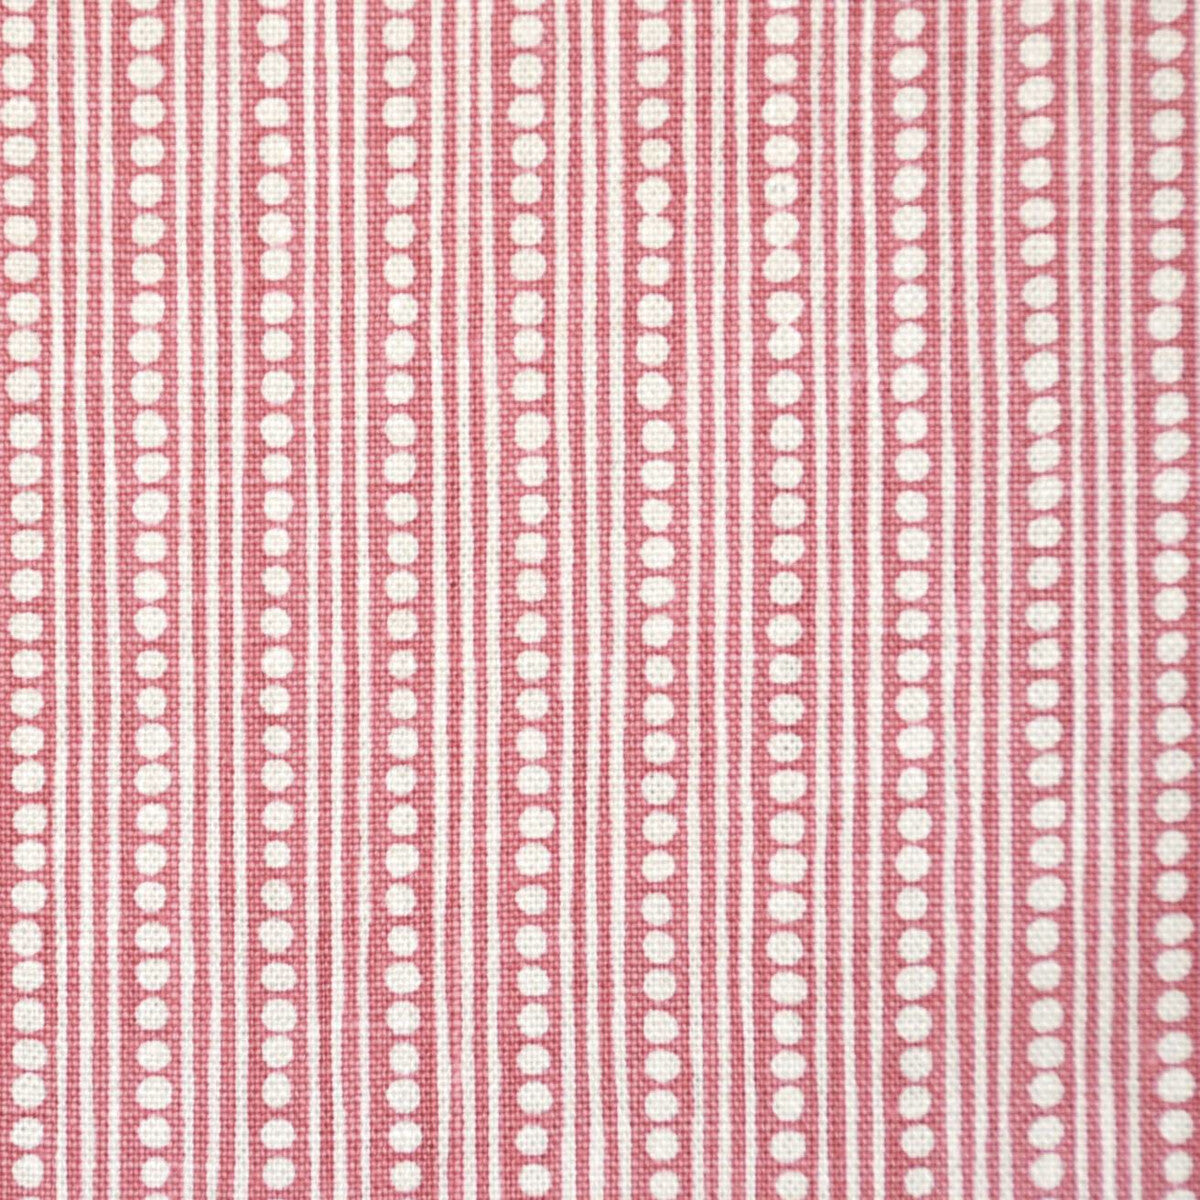 Wicklewood Reverse fabric in dark pink color - pattern BFC-3627.7.0 - by Lee Jofa in the Blithfield collection